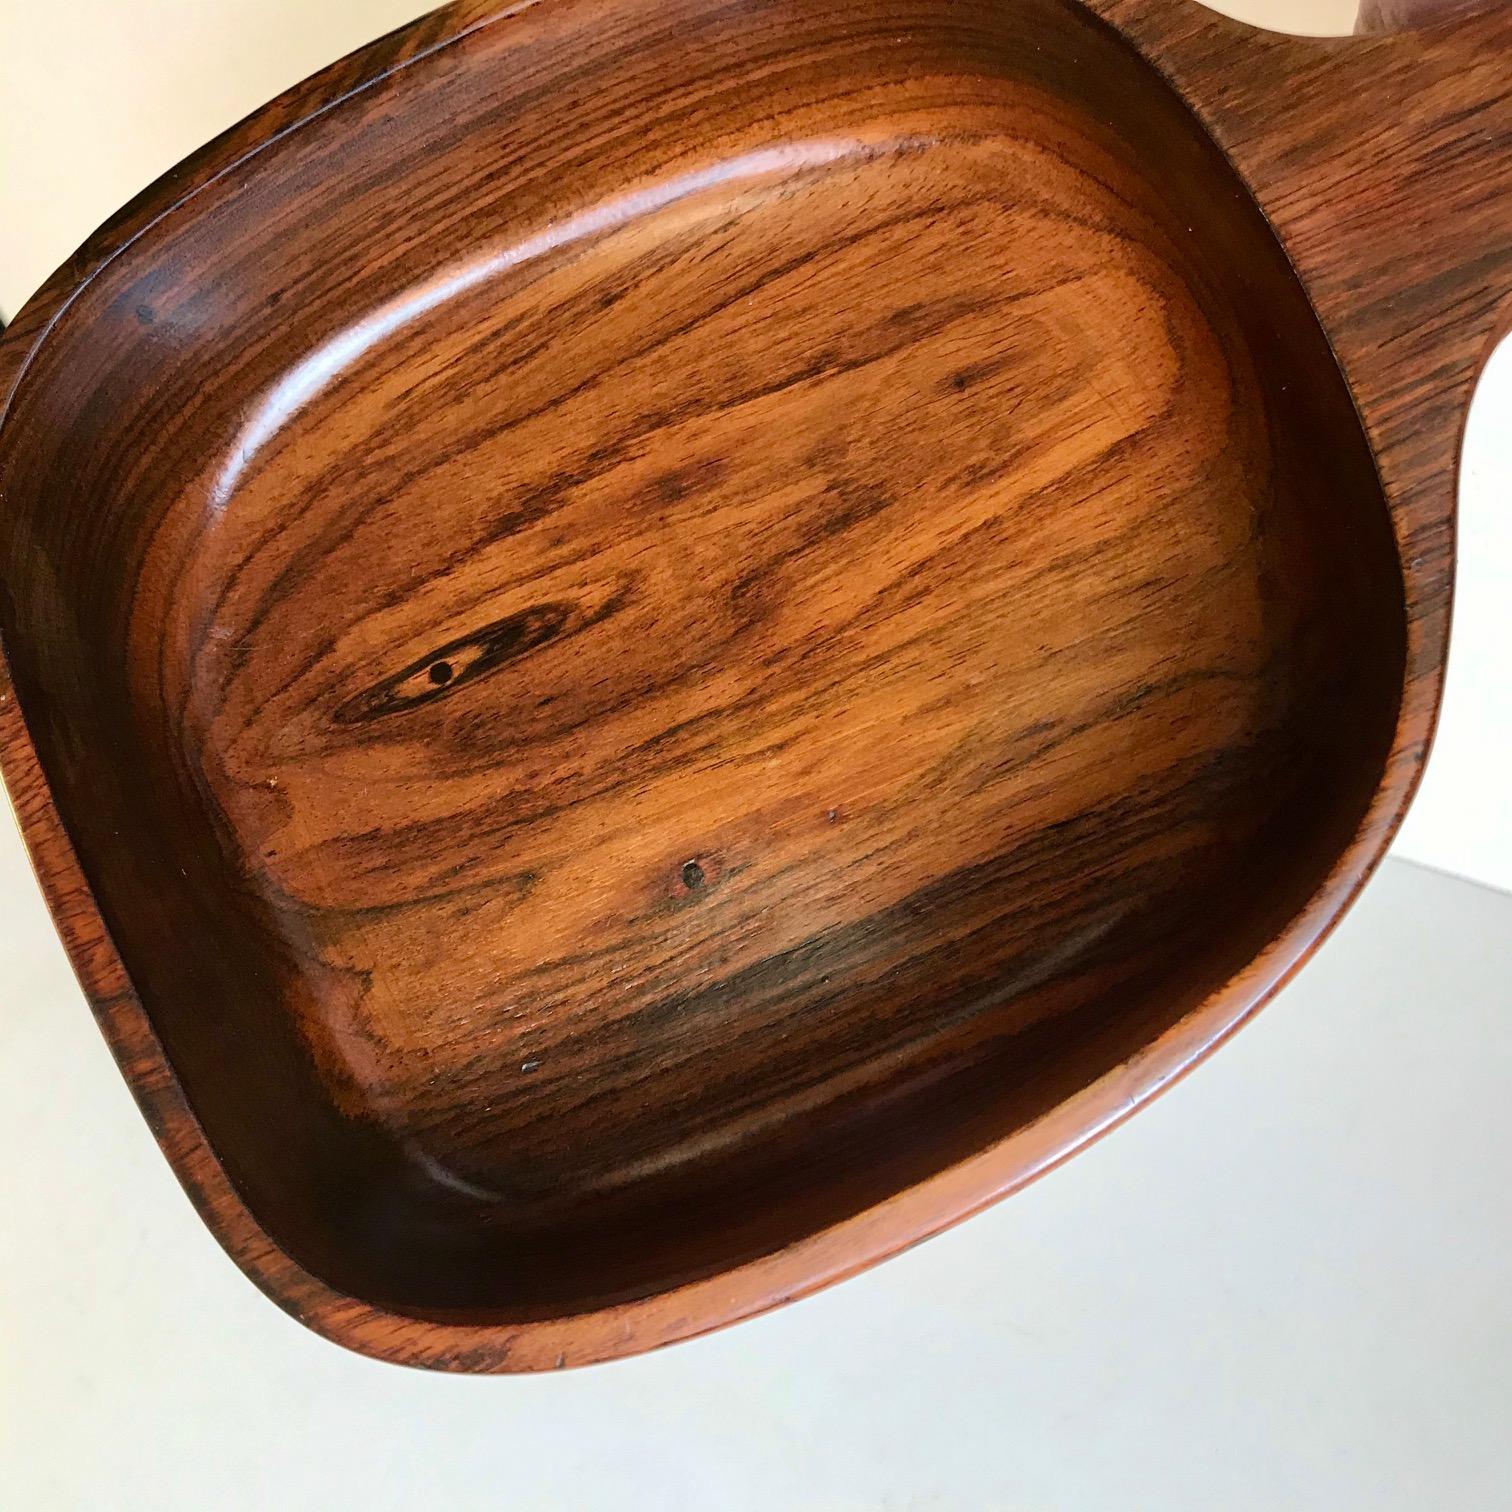 Organically shaped bowl in Brazilian Jacaranda wood. Designed by Brazilian wood art icon Jean Gillon during the 1960s in a series for Italma and Georg Jensen in Denmark. Due to Cites regulation this bowl can only be sold within the EU.